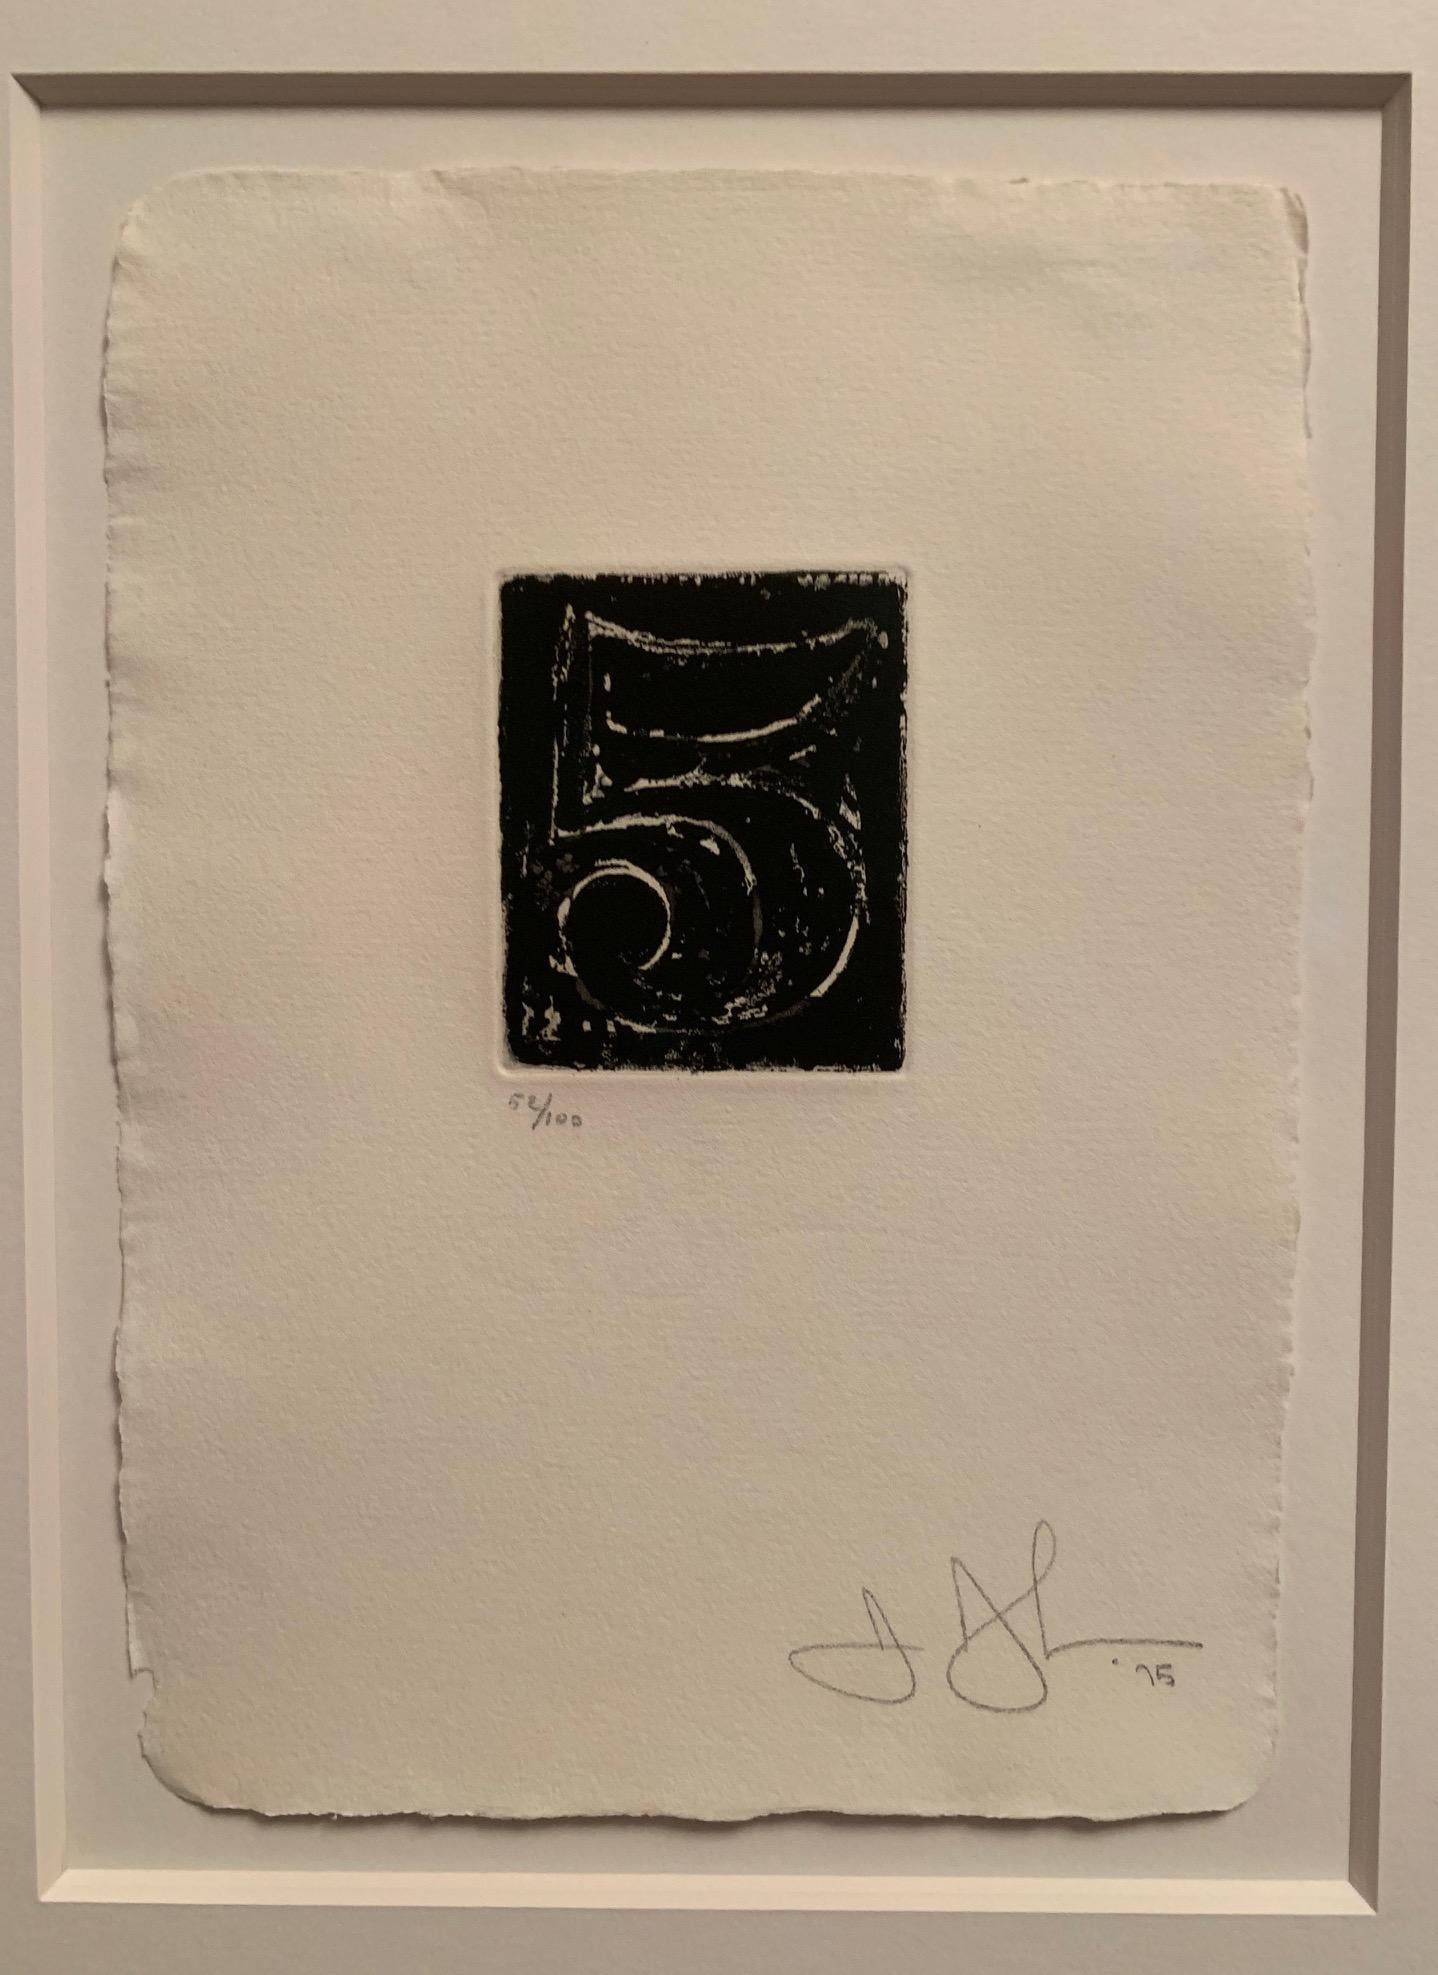 No. 5, etching and aquatint, Contemporary Fine Art,  framed - Print by Jasper Johns